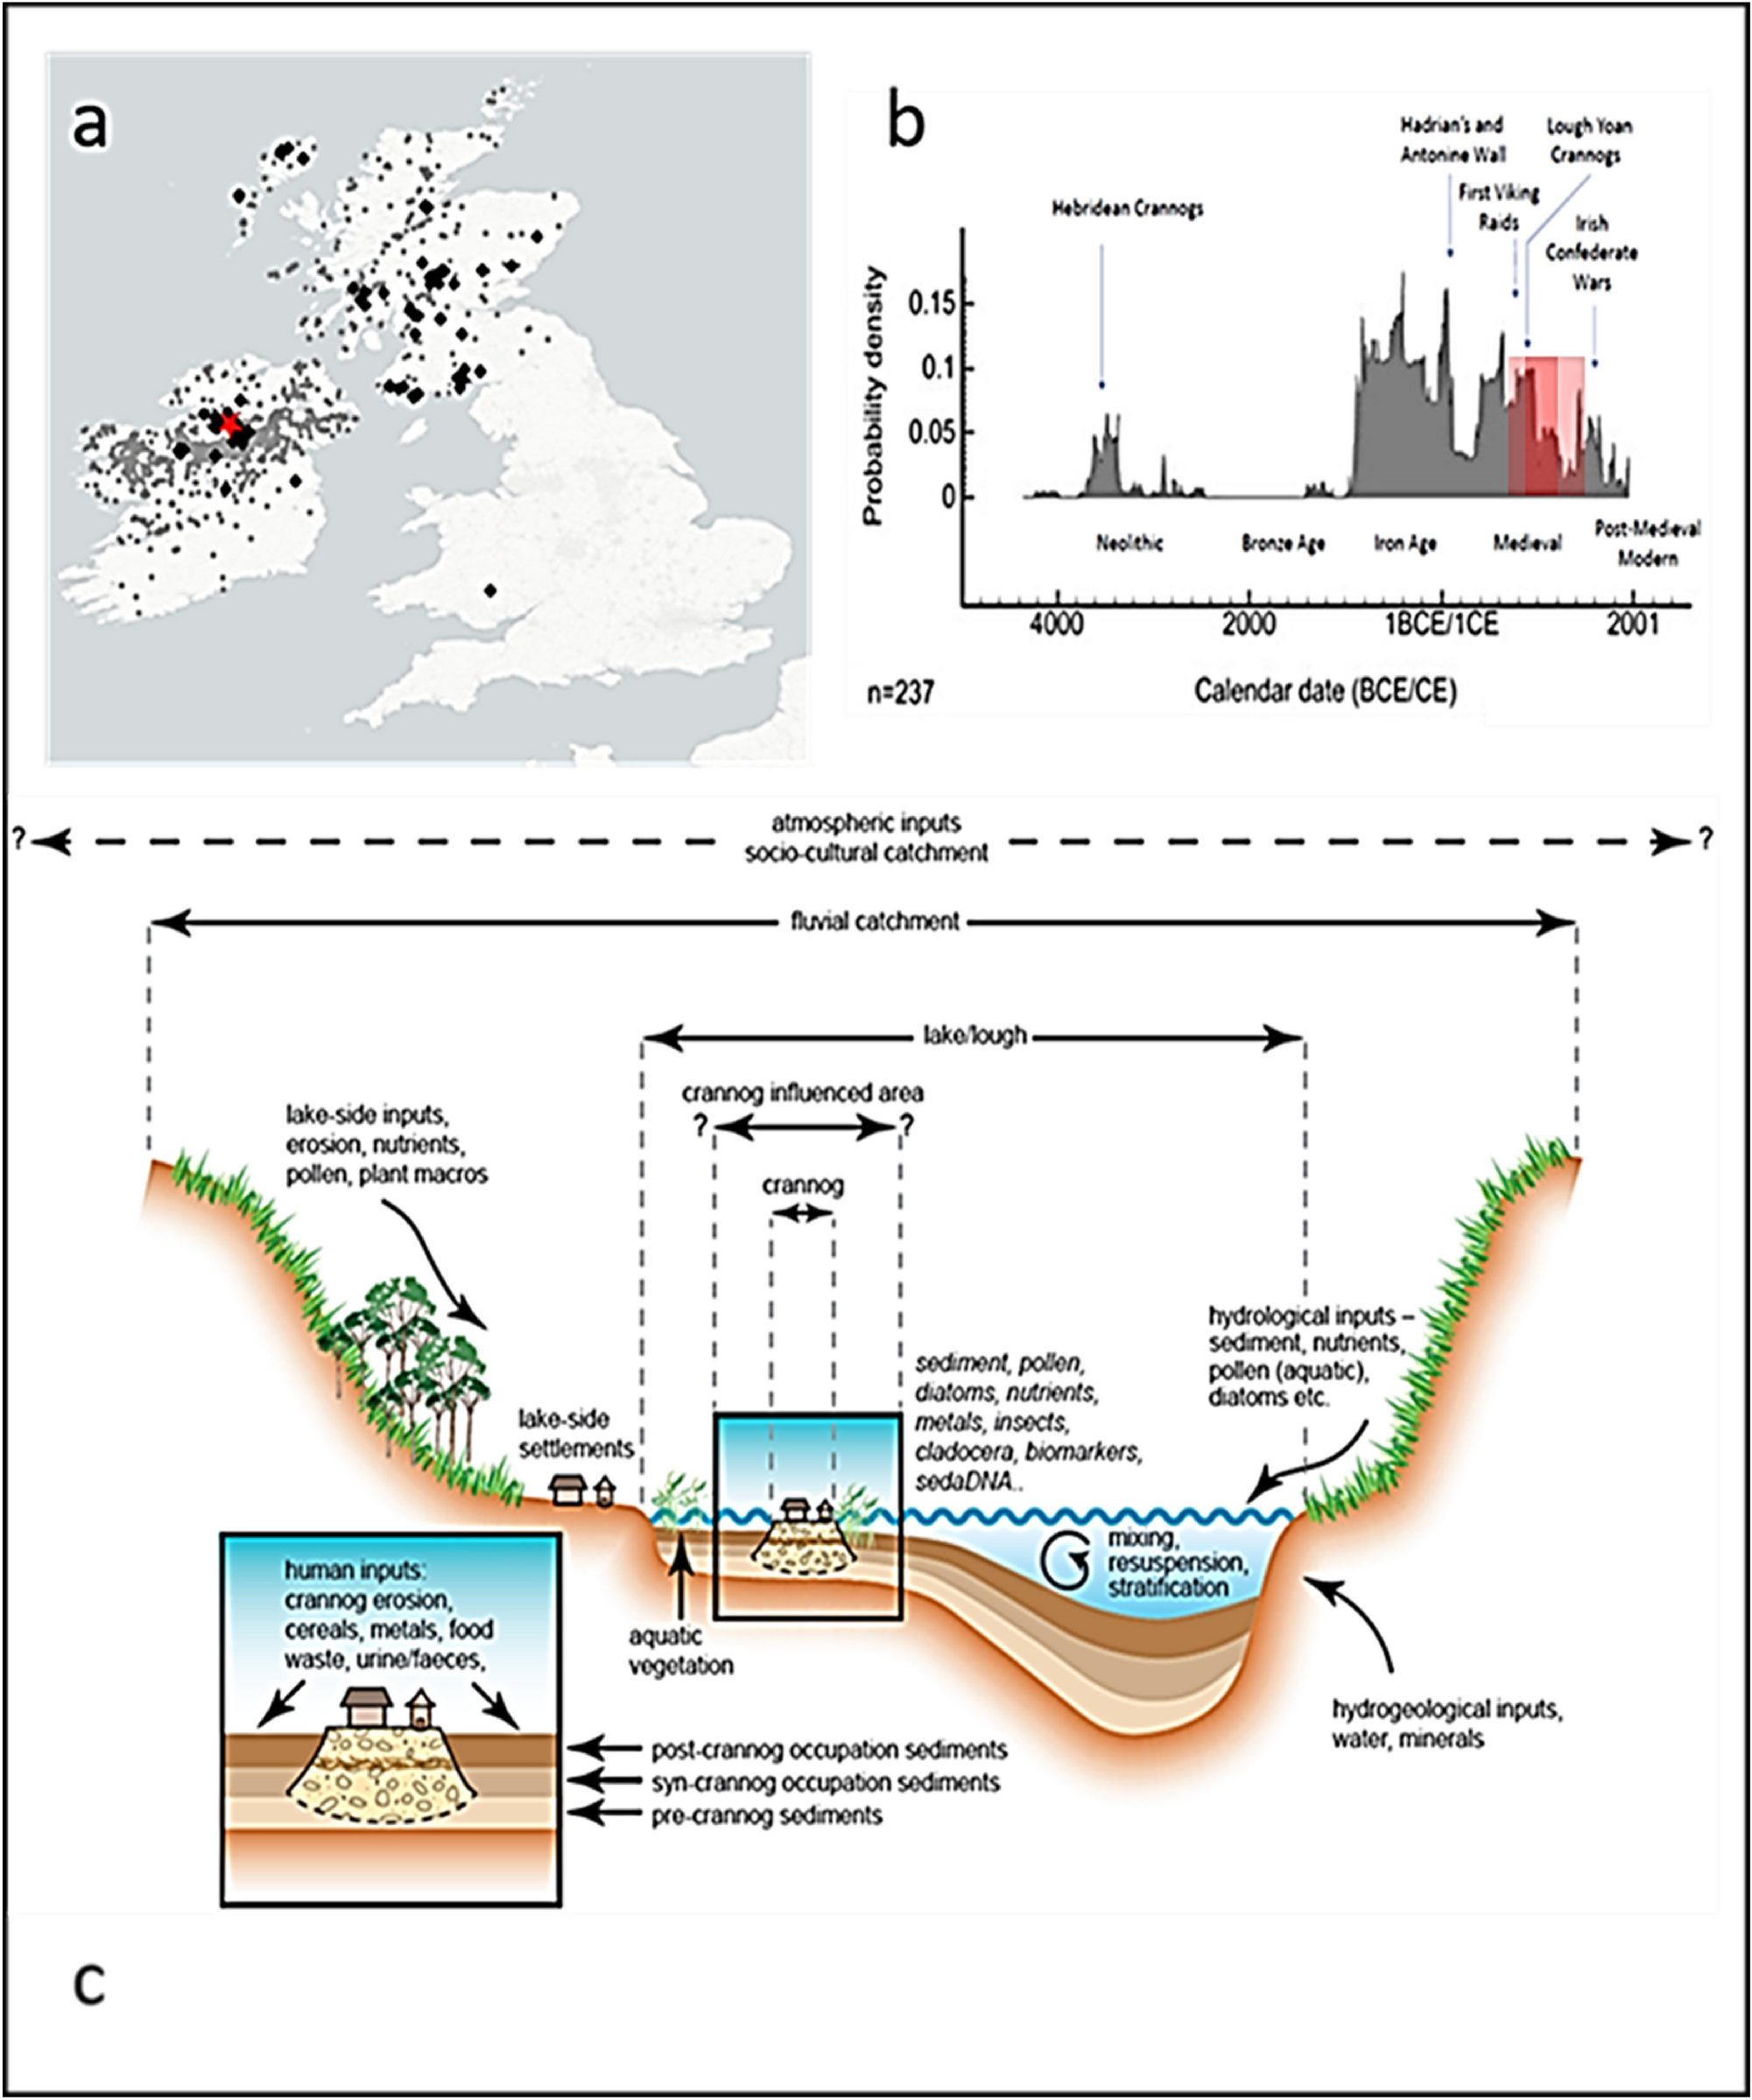 Ancient Dna Lipid Biomarkers And Palaeoecological Evidence Reveals Construction And Life On Early Medieval Lake Settlements Scientific Reports